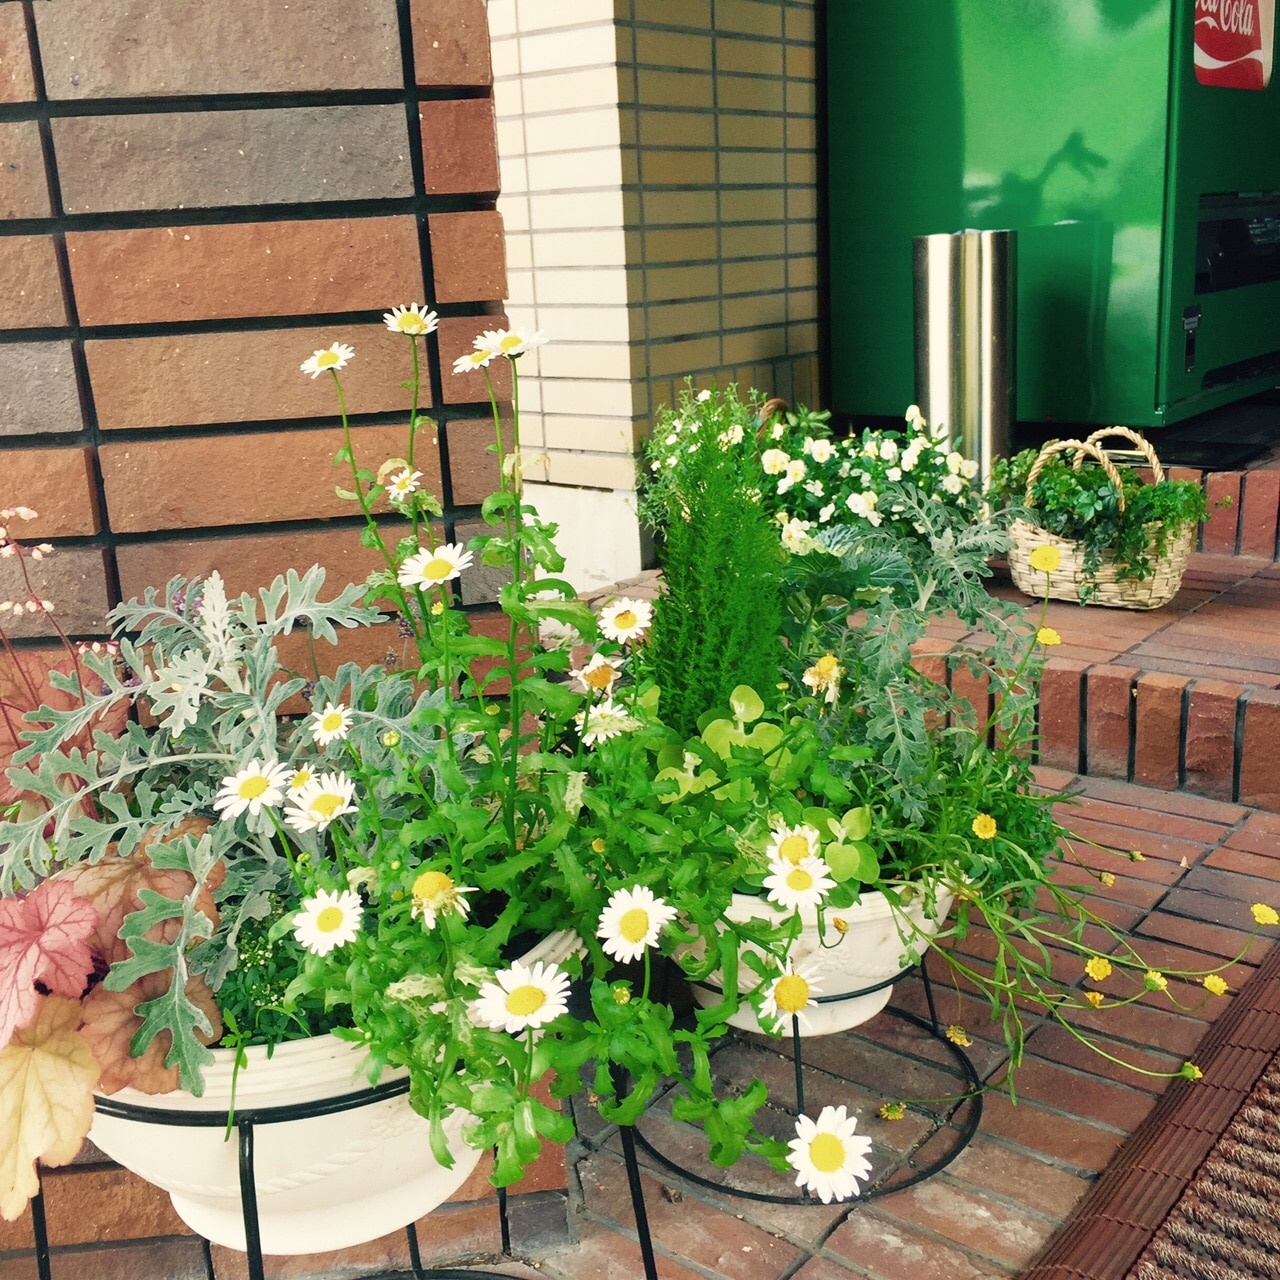 ･ Flowers at the entrance ･